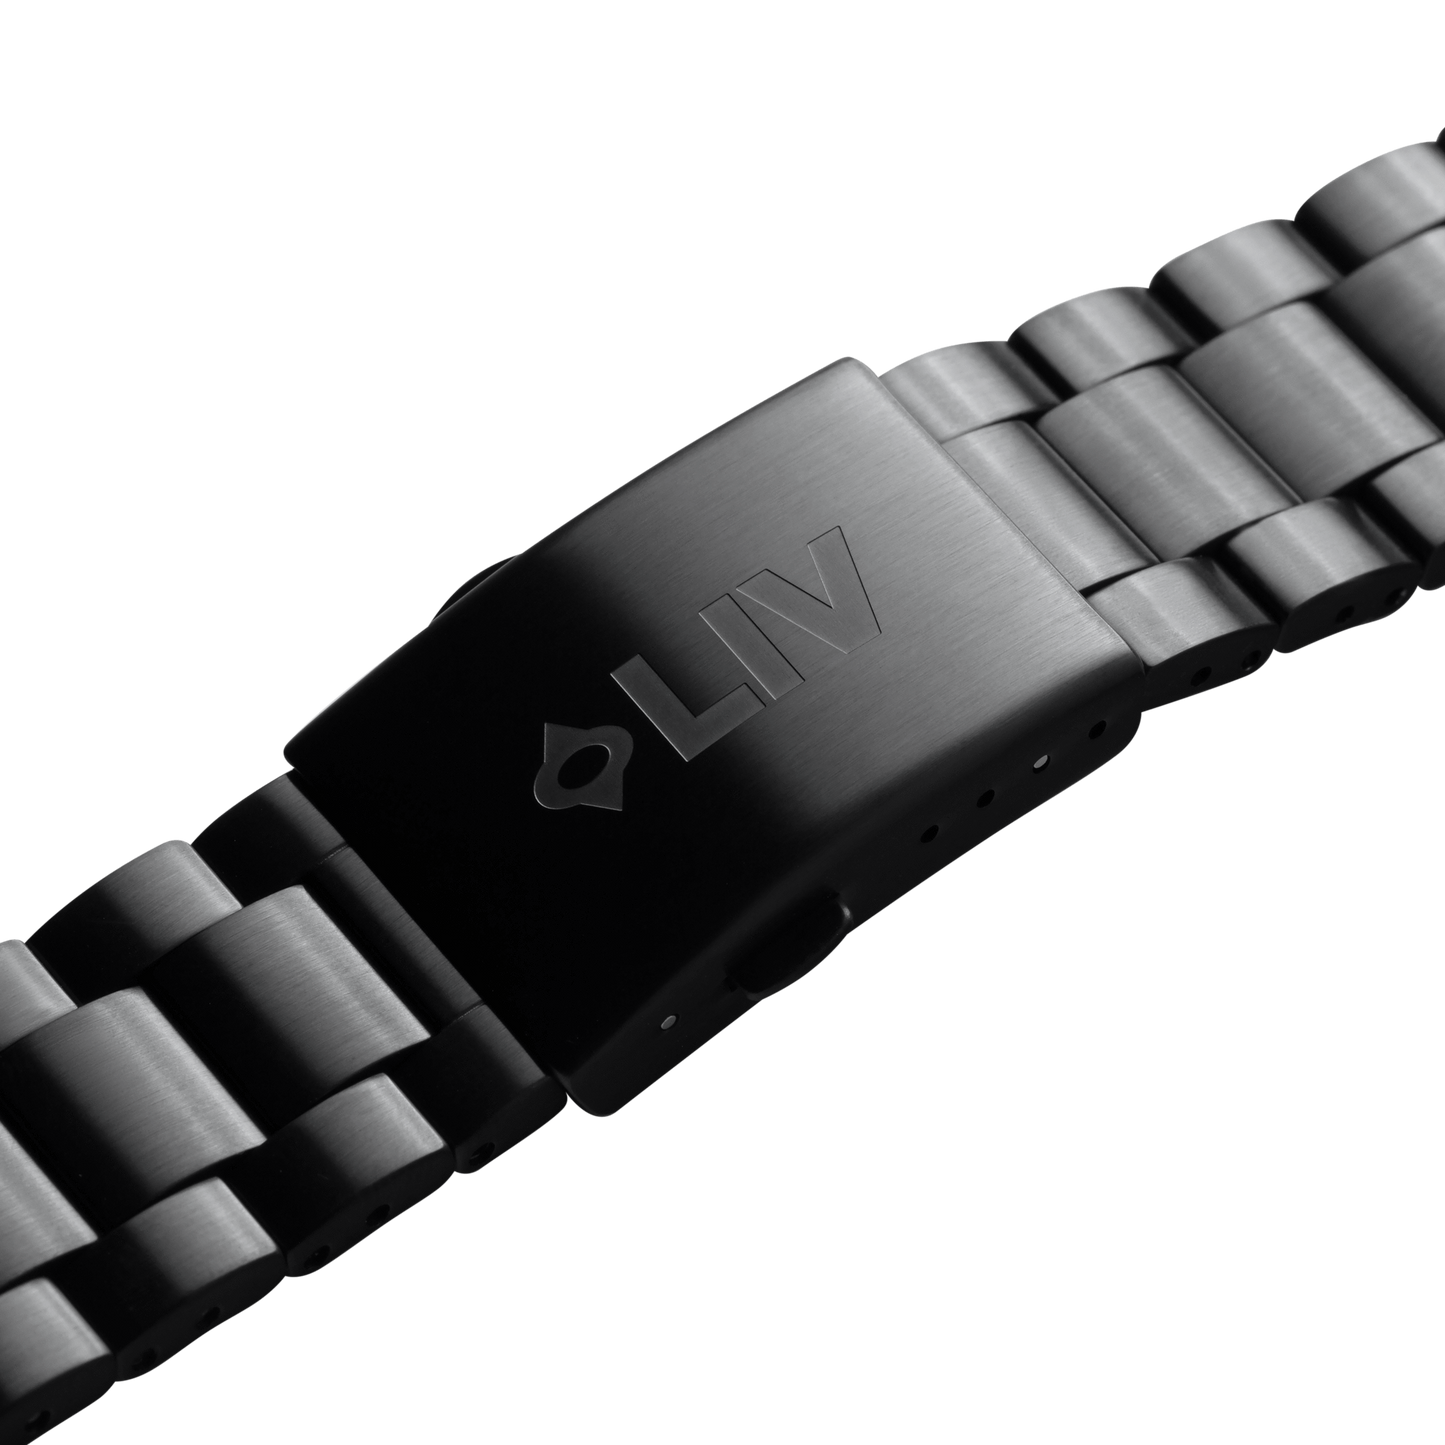 Stainless Steel Bracelet | 23mm - LIV Swiss Watches